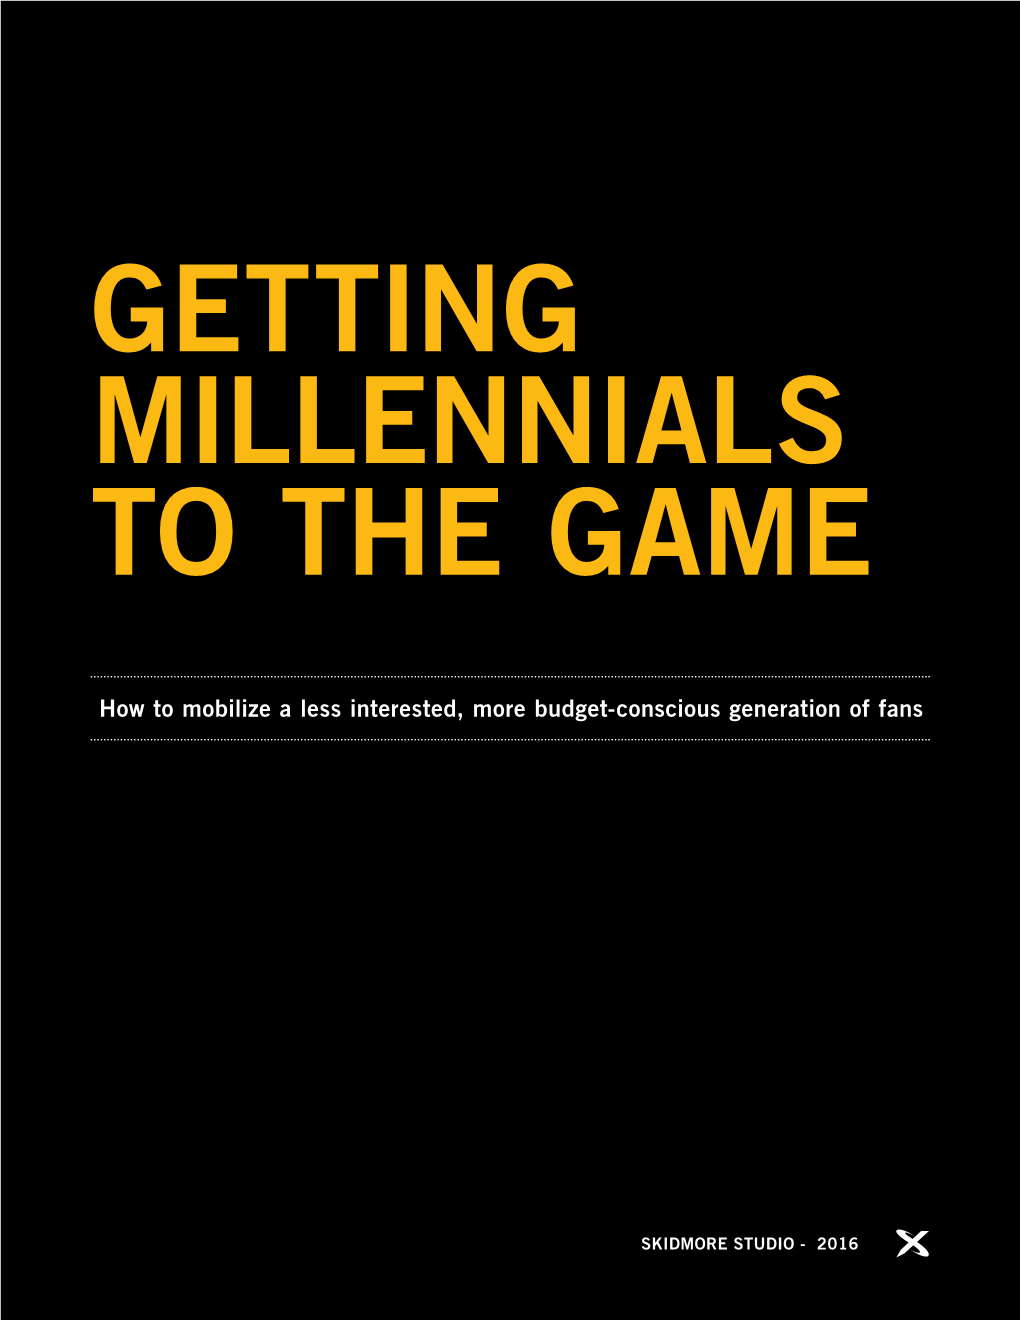 How to Mobilize a Less Interested, More Budget-Conscious Generation of Fans